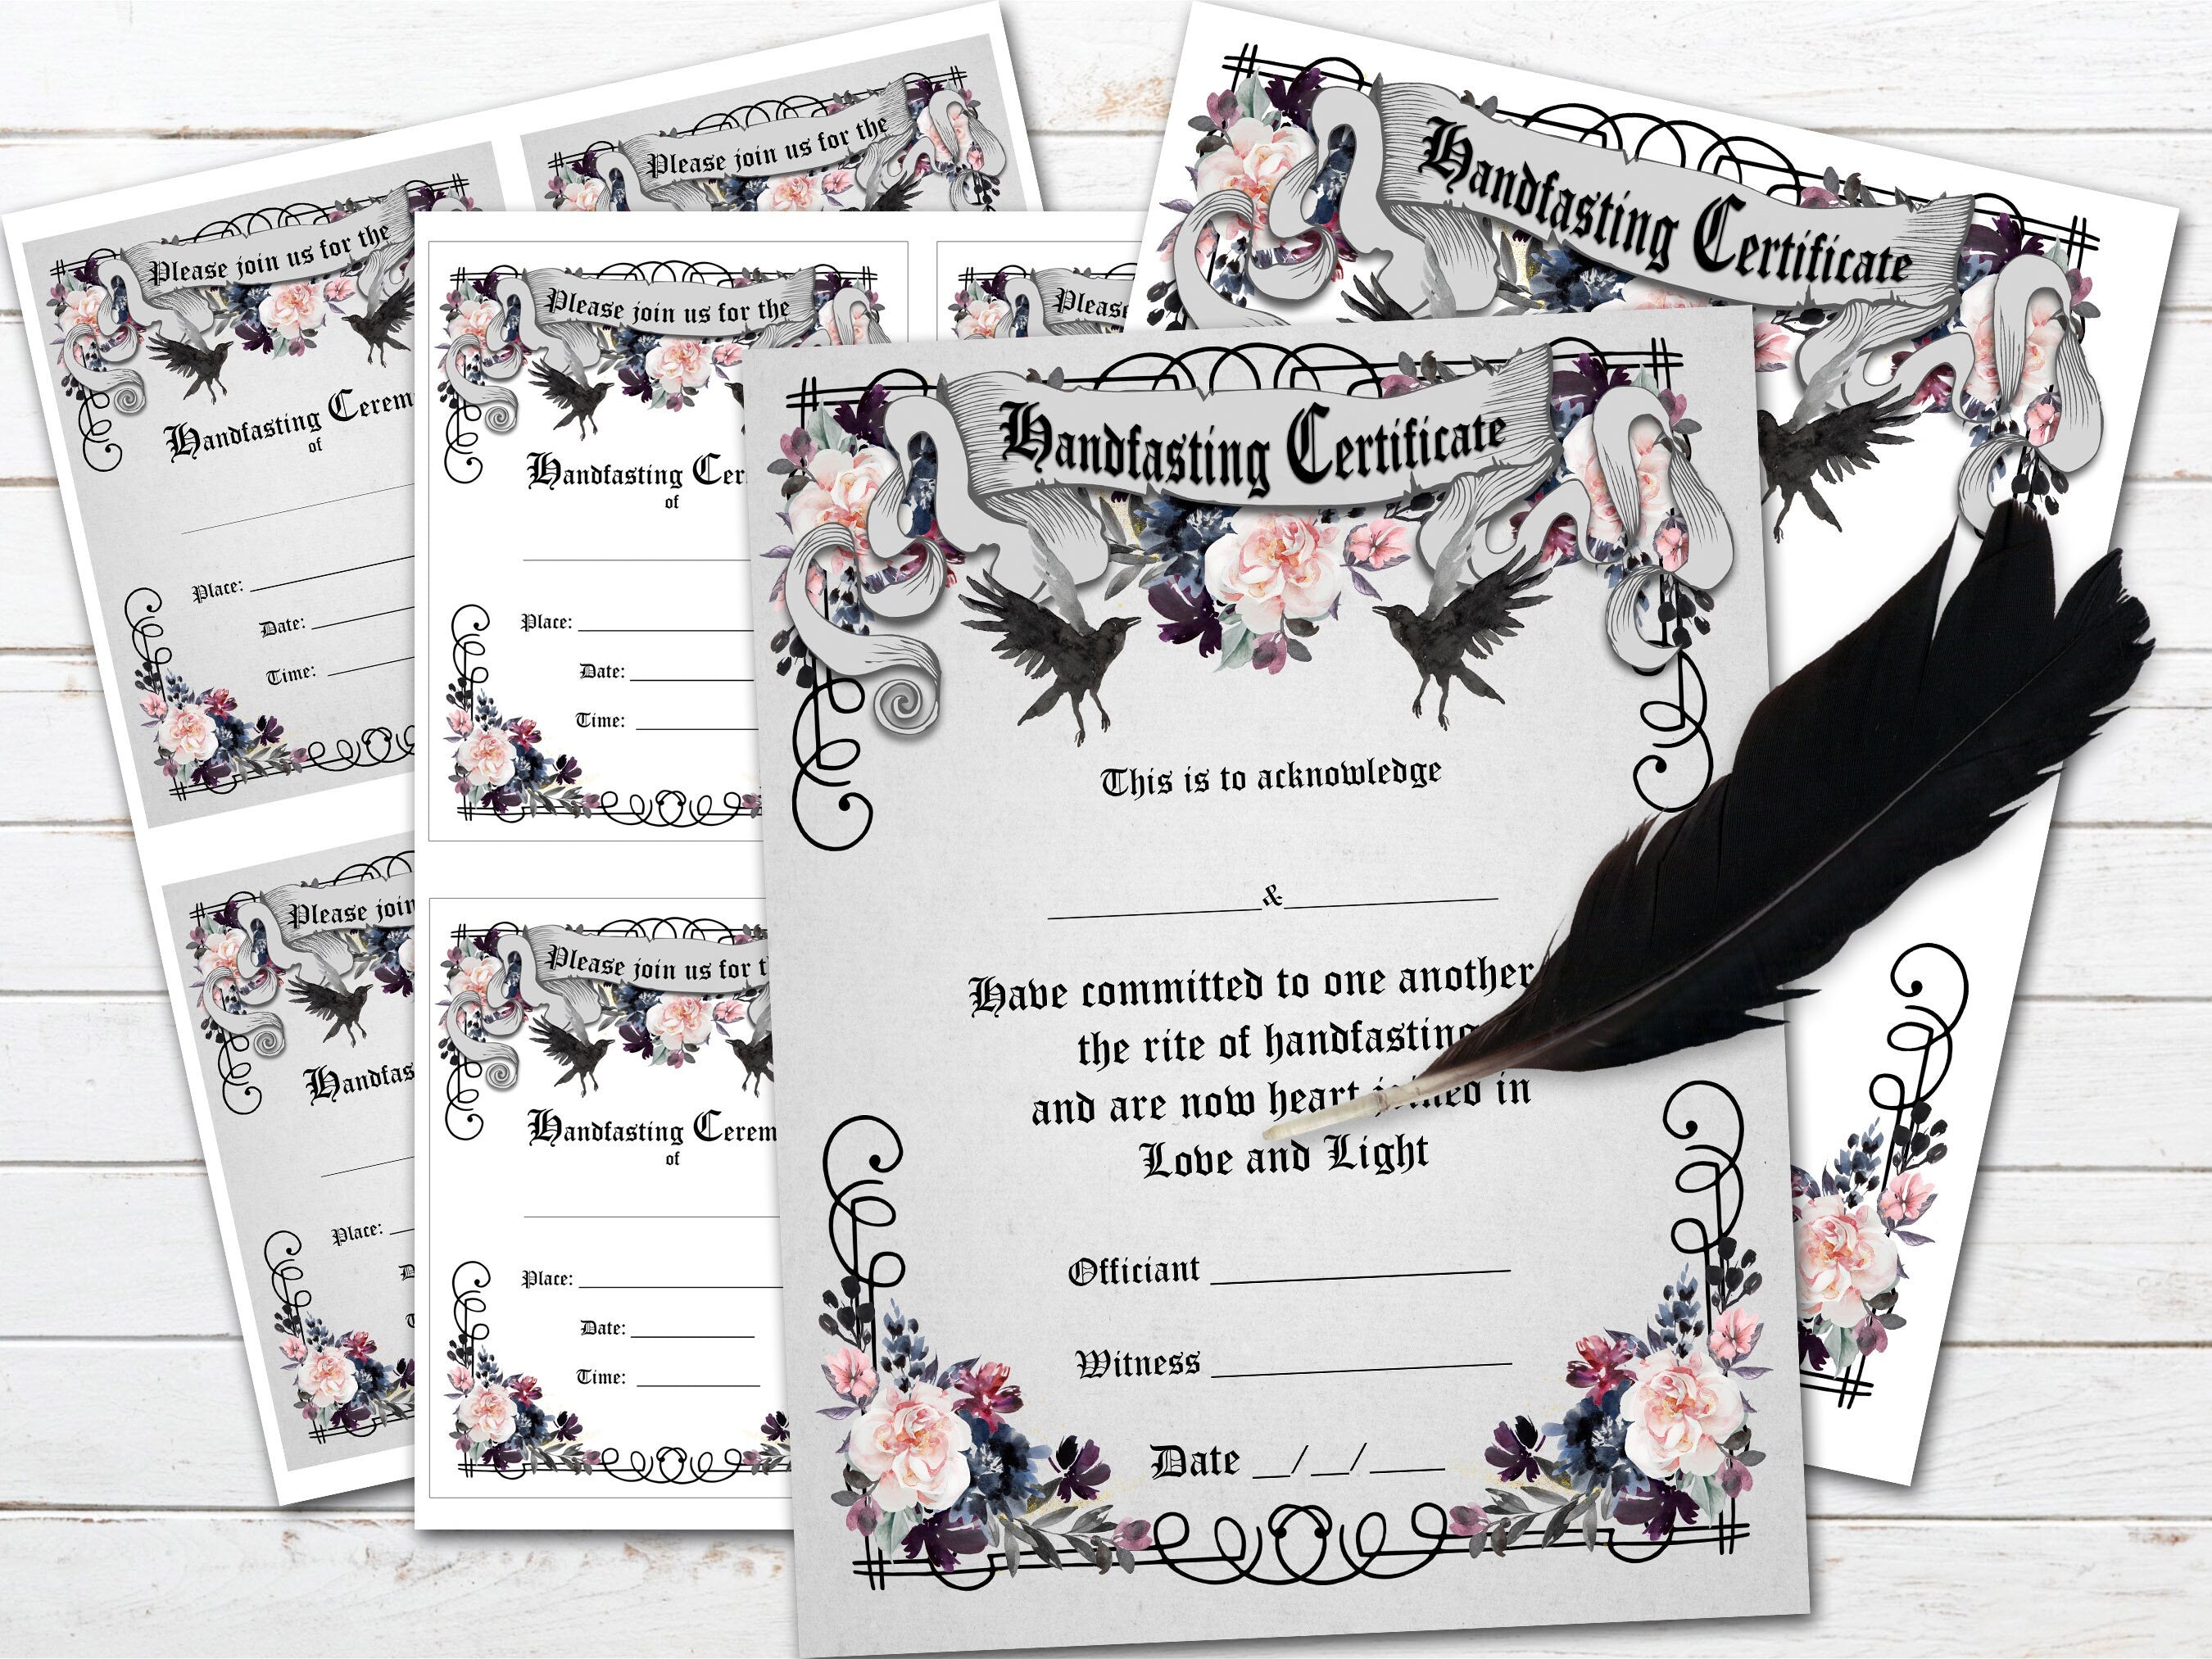 HANDFASTING RAVENS Certificate & Invitation Printable shown with the optional white and grey background.